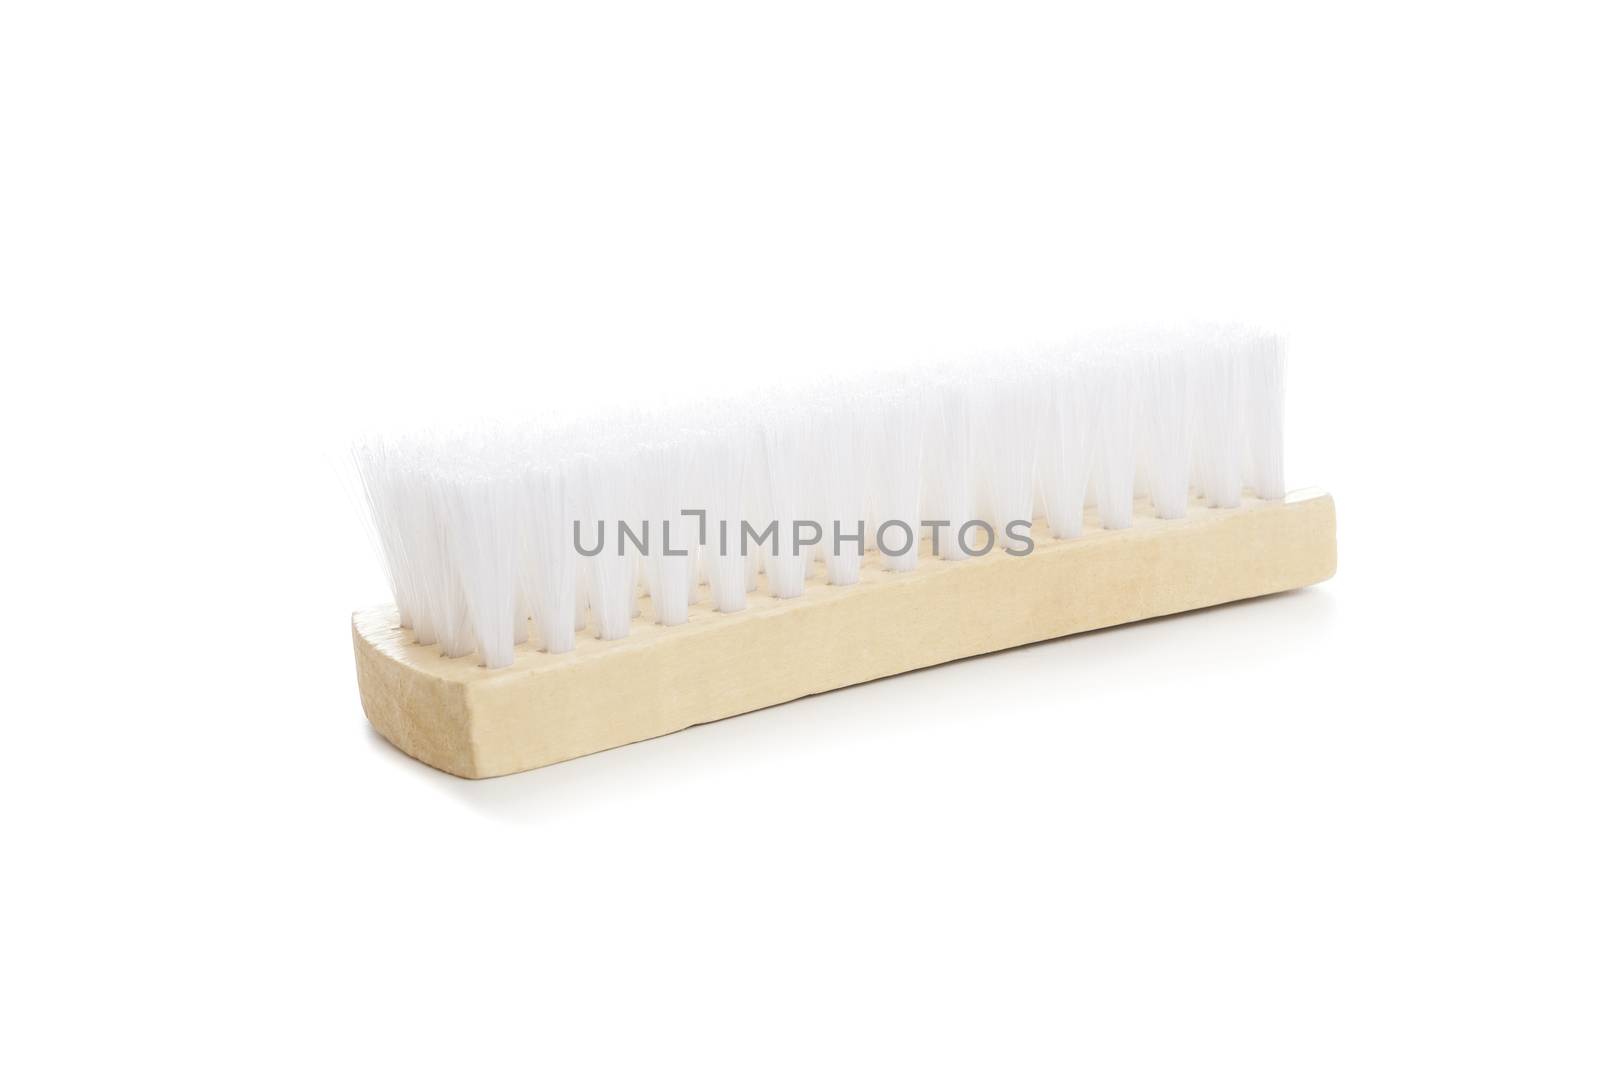 clothes cleaning brush close-up isolated on white background by SlayCer